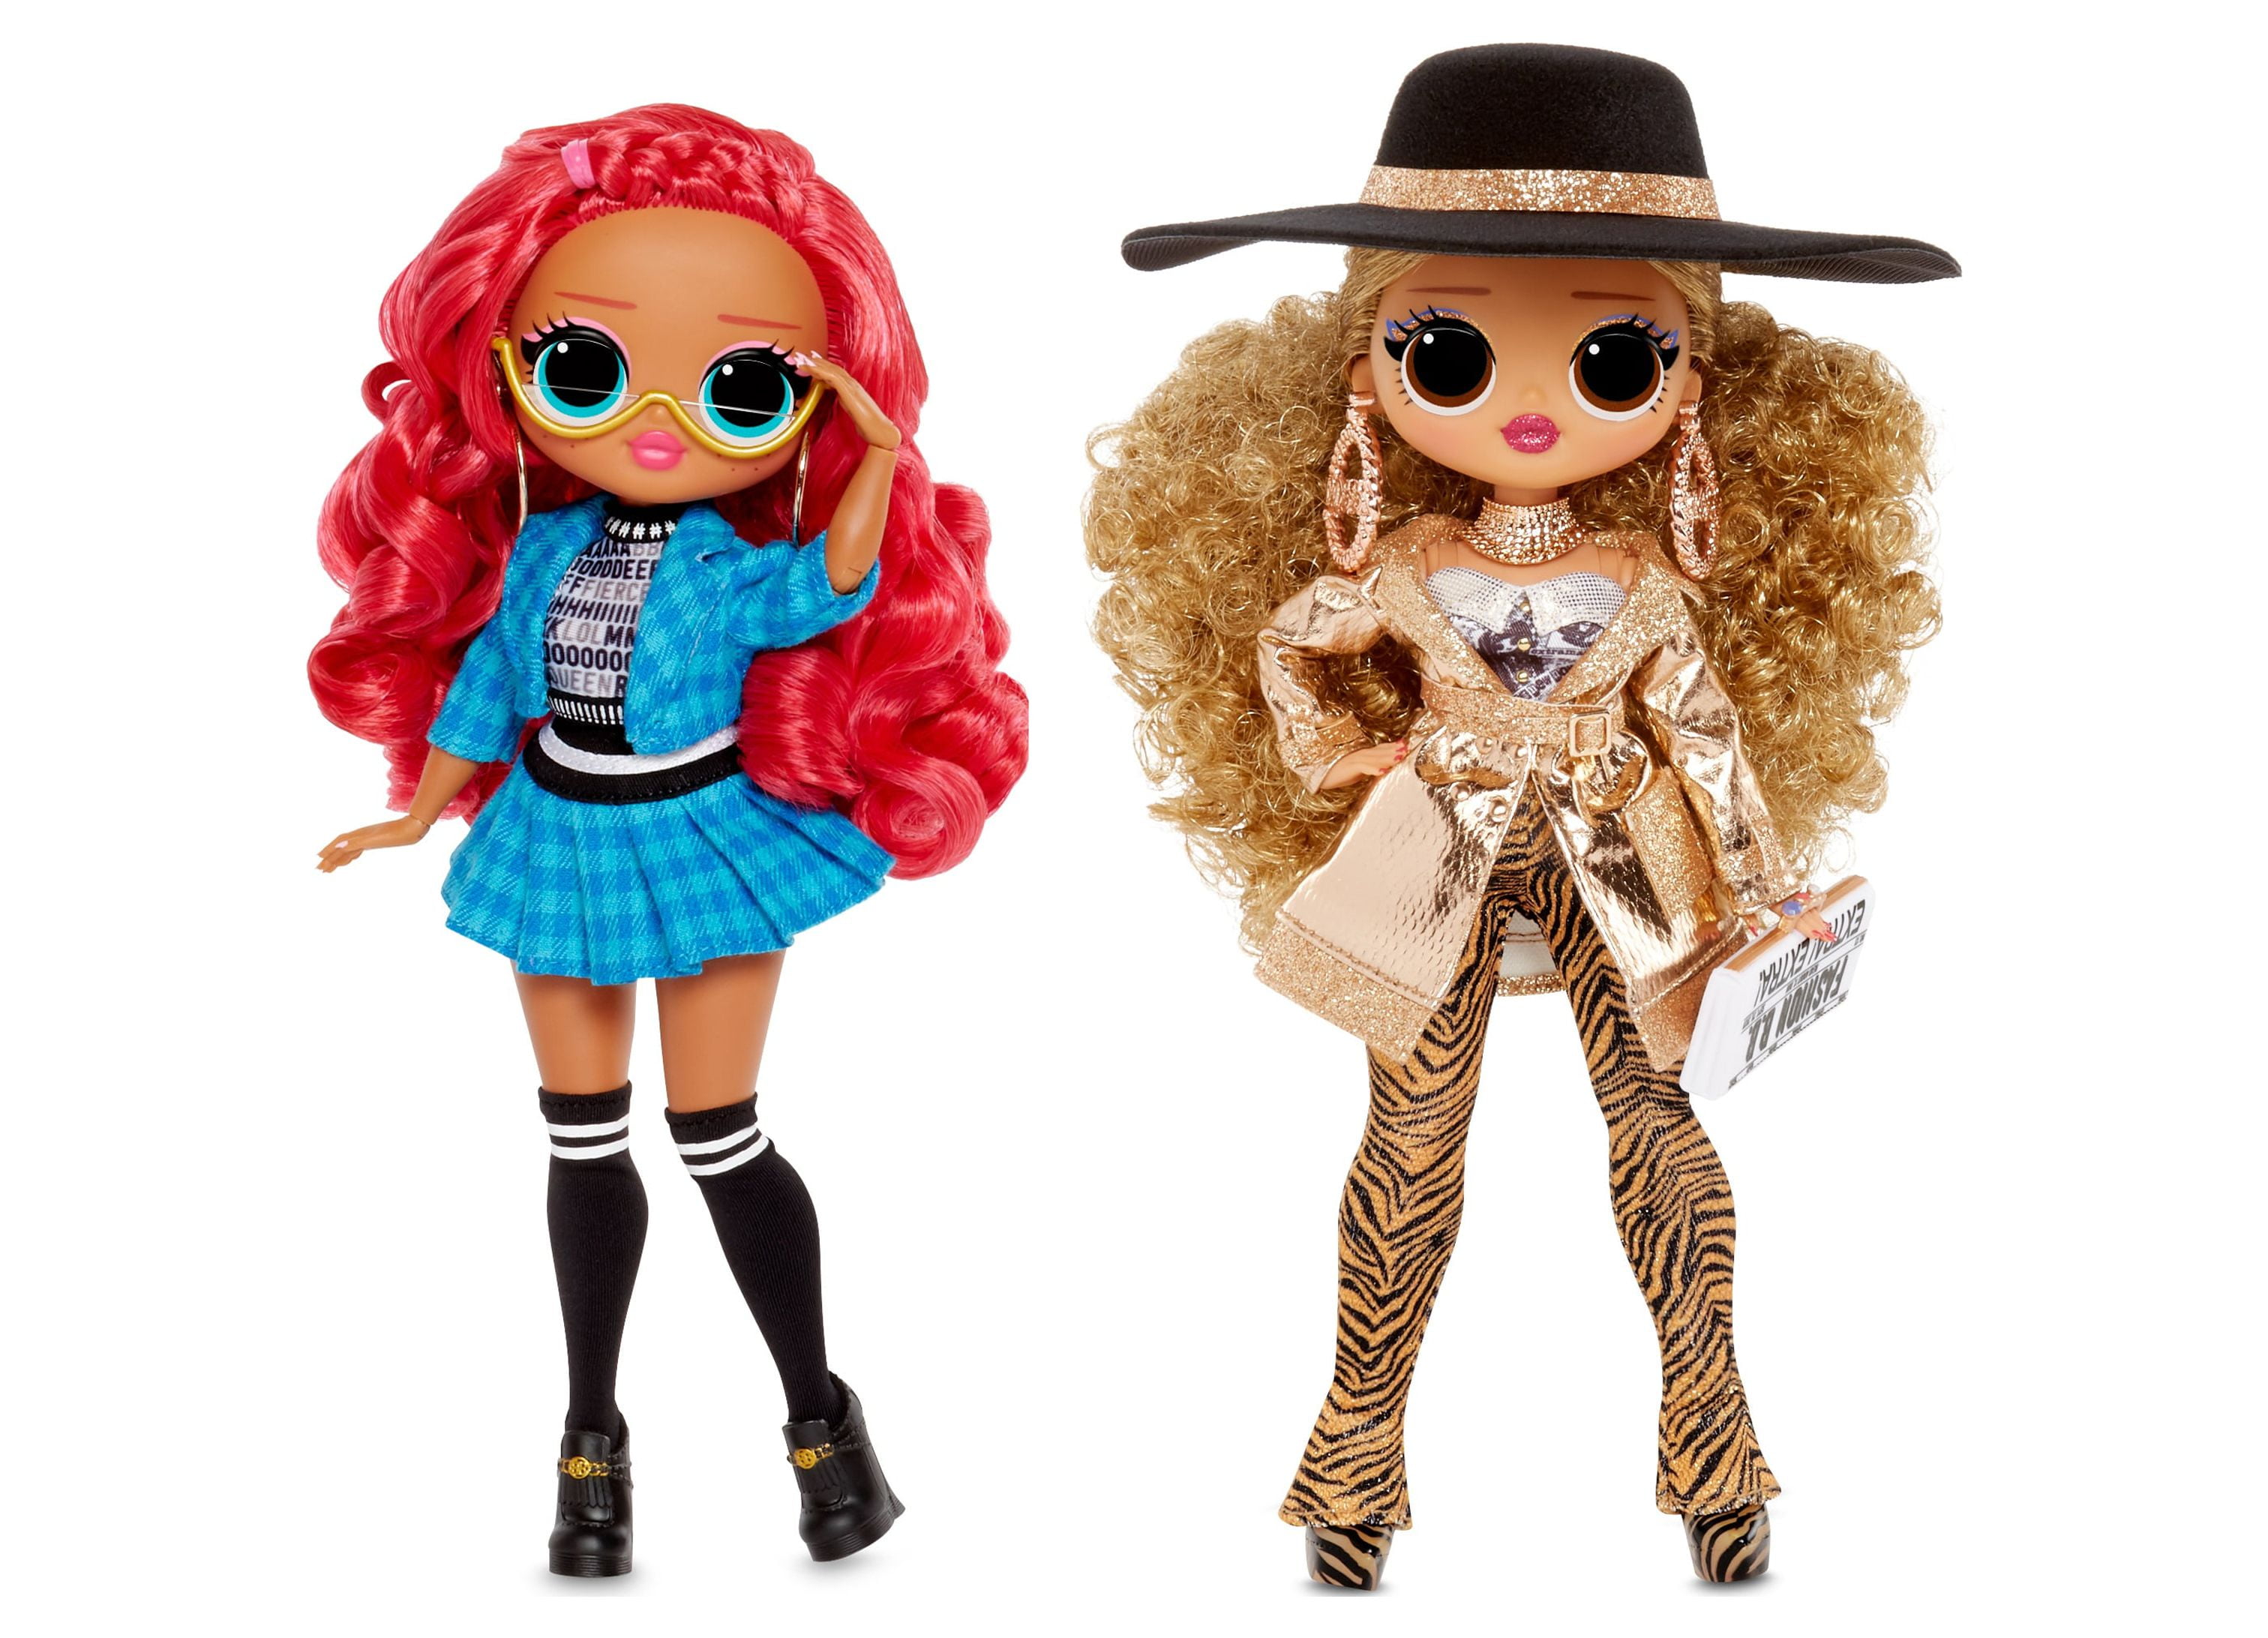 Lol Surprise OMG 2-Pack Da Boss & Class Prez Fashion Dolls 2-Pack with 20 Surprises Each, Stylish Fashion Outfits and Doll Accessories